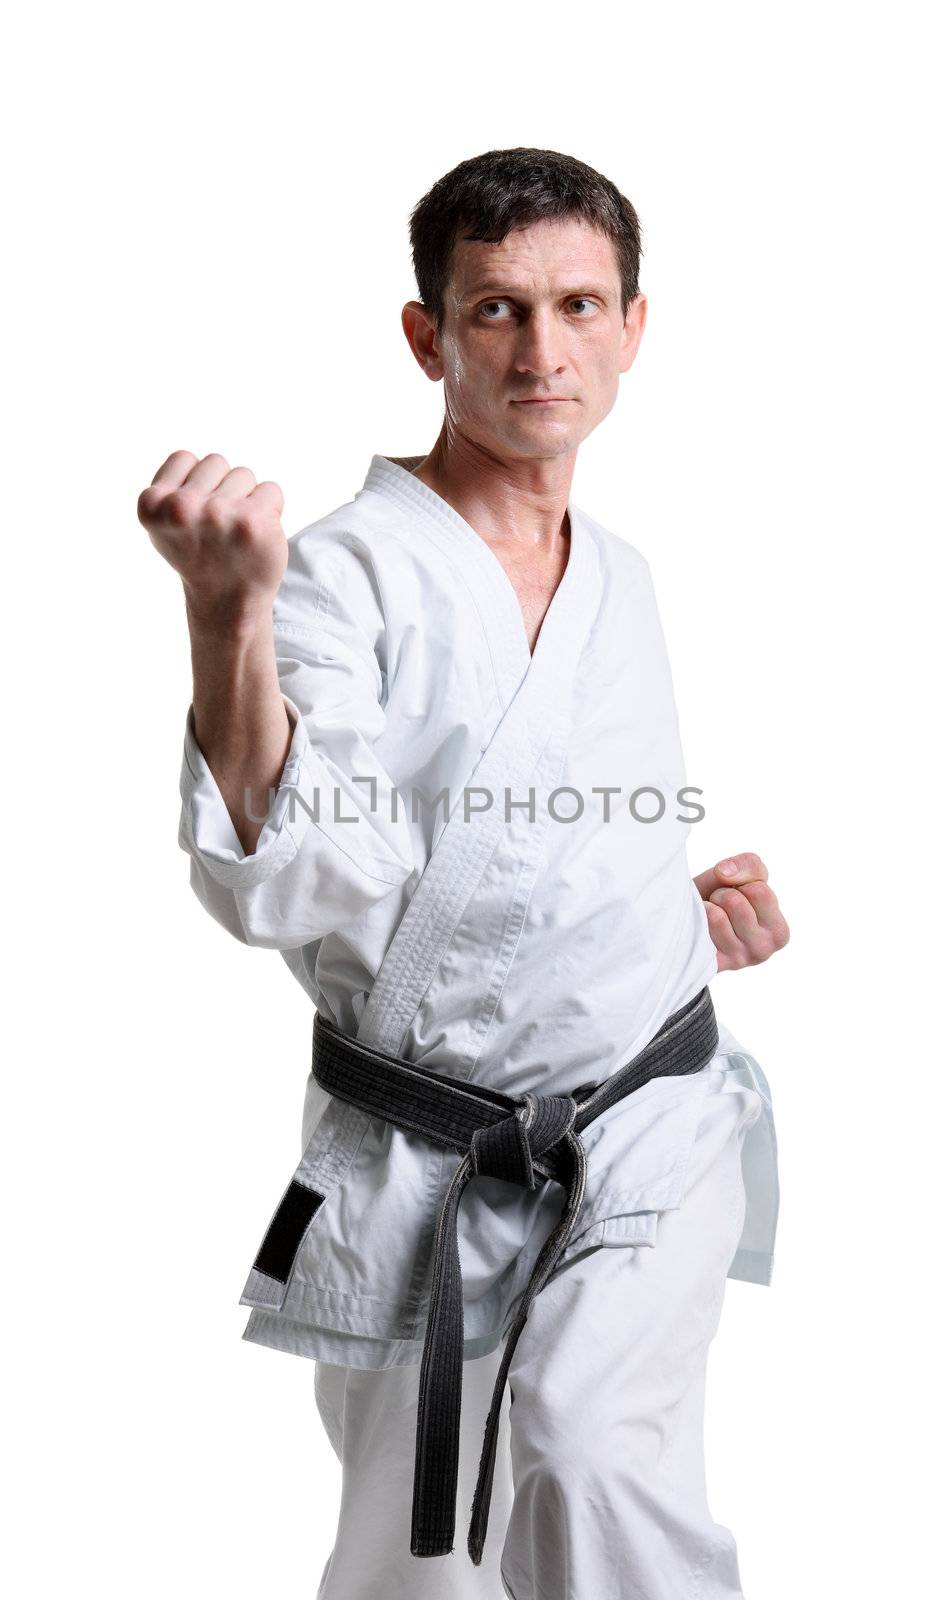 Karate. Man in a kimono with a white background